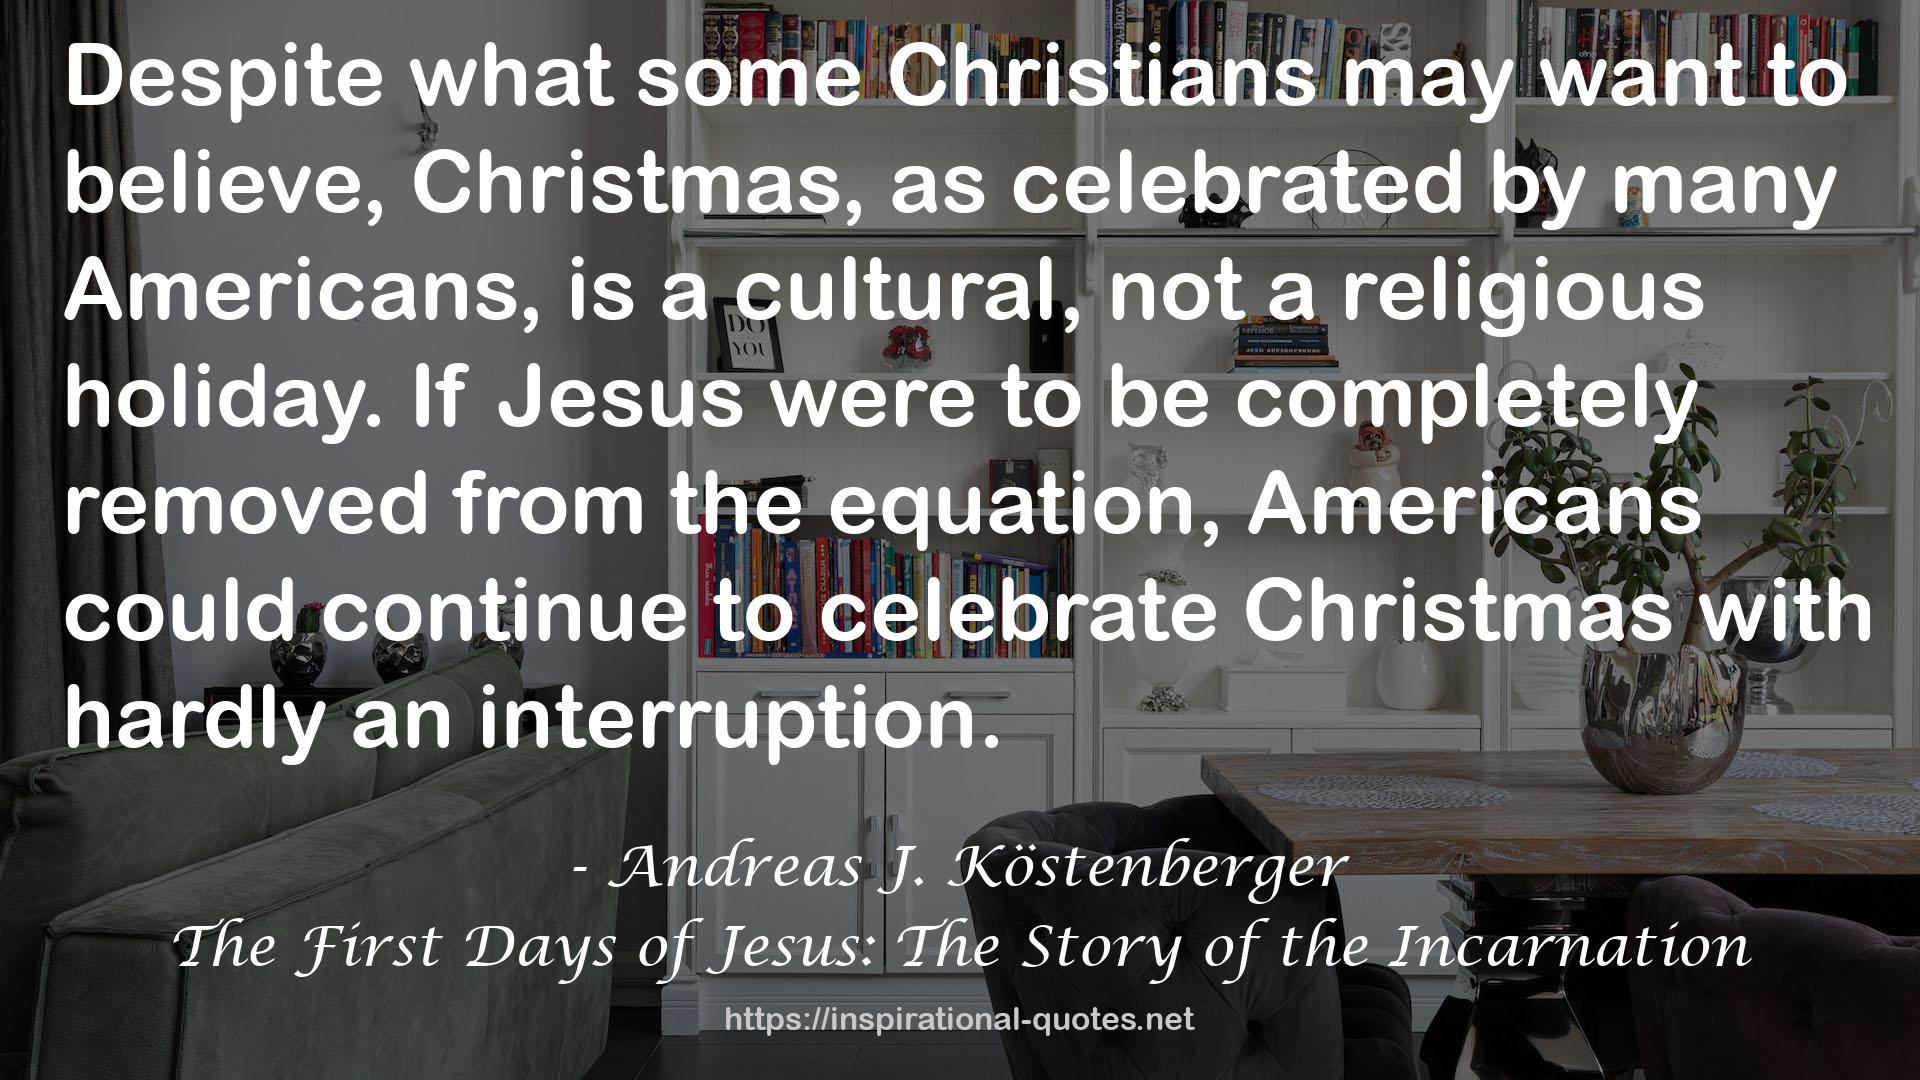 The First Days of Jesus: The Story of the Incarnation QUOTES